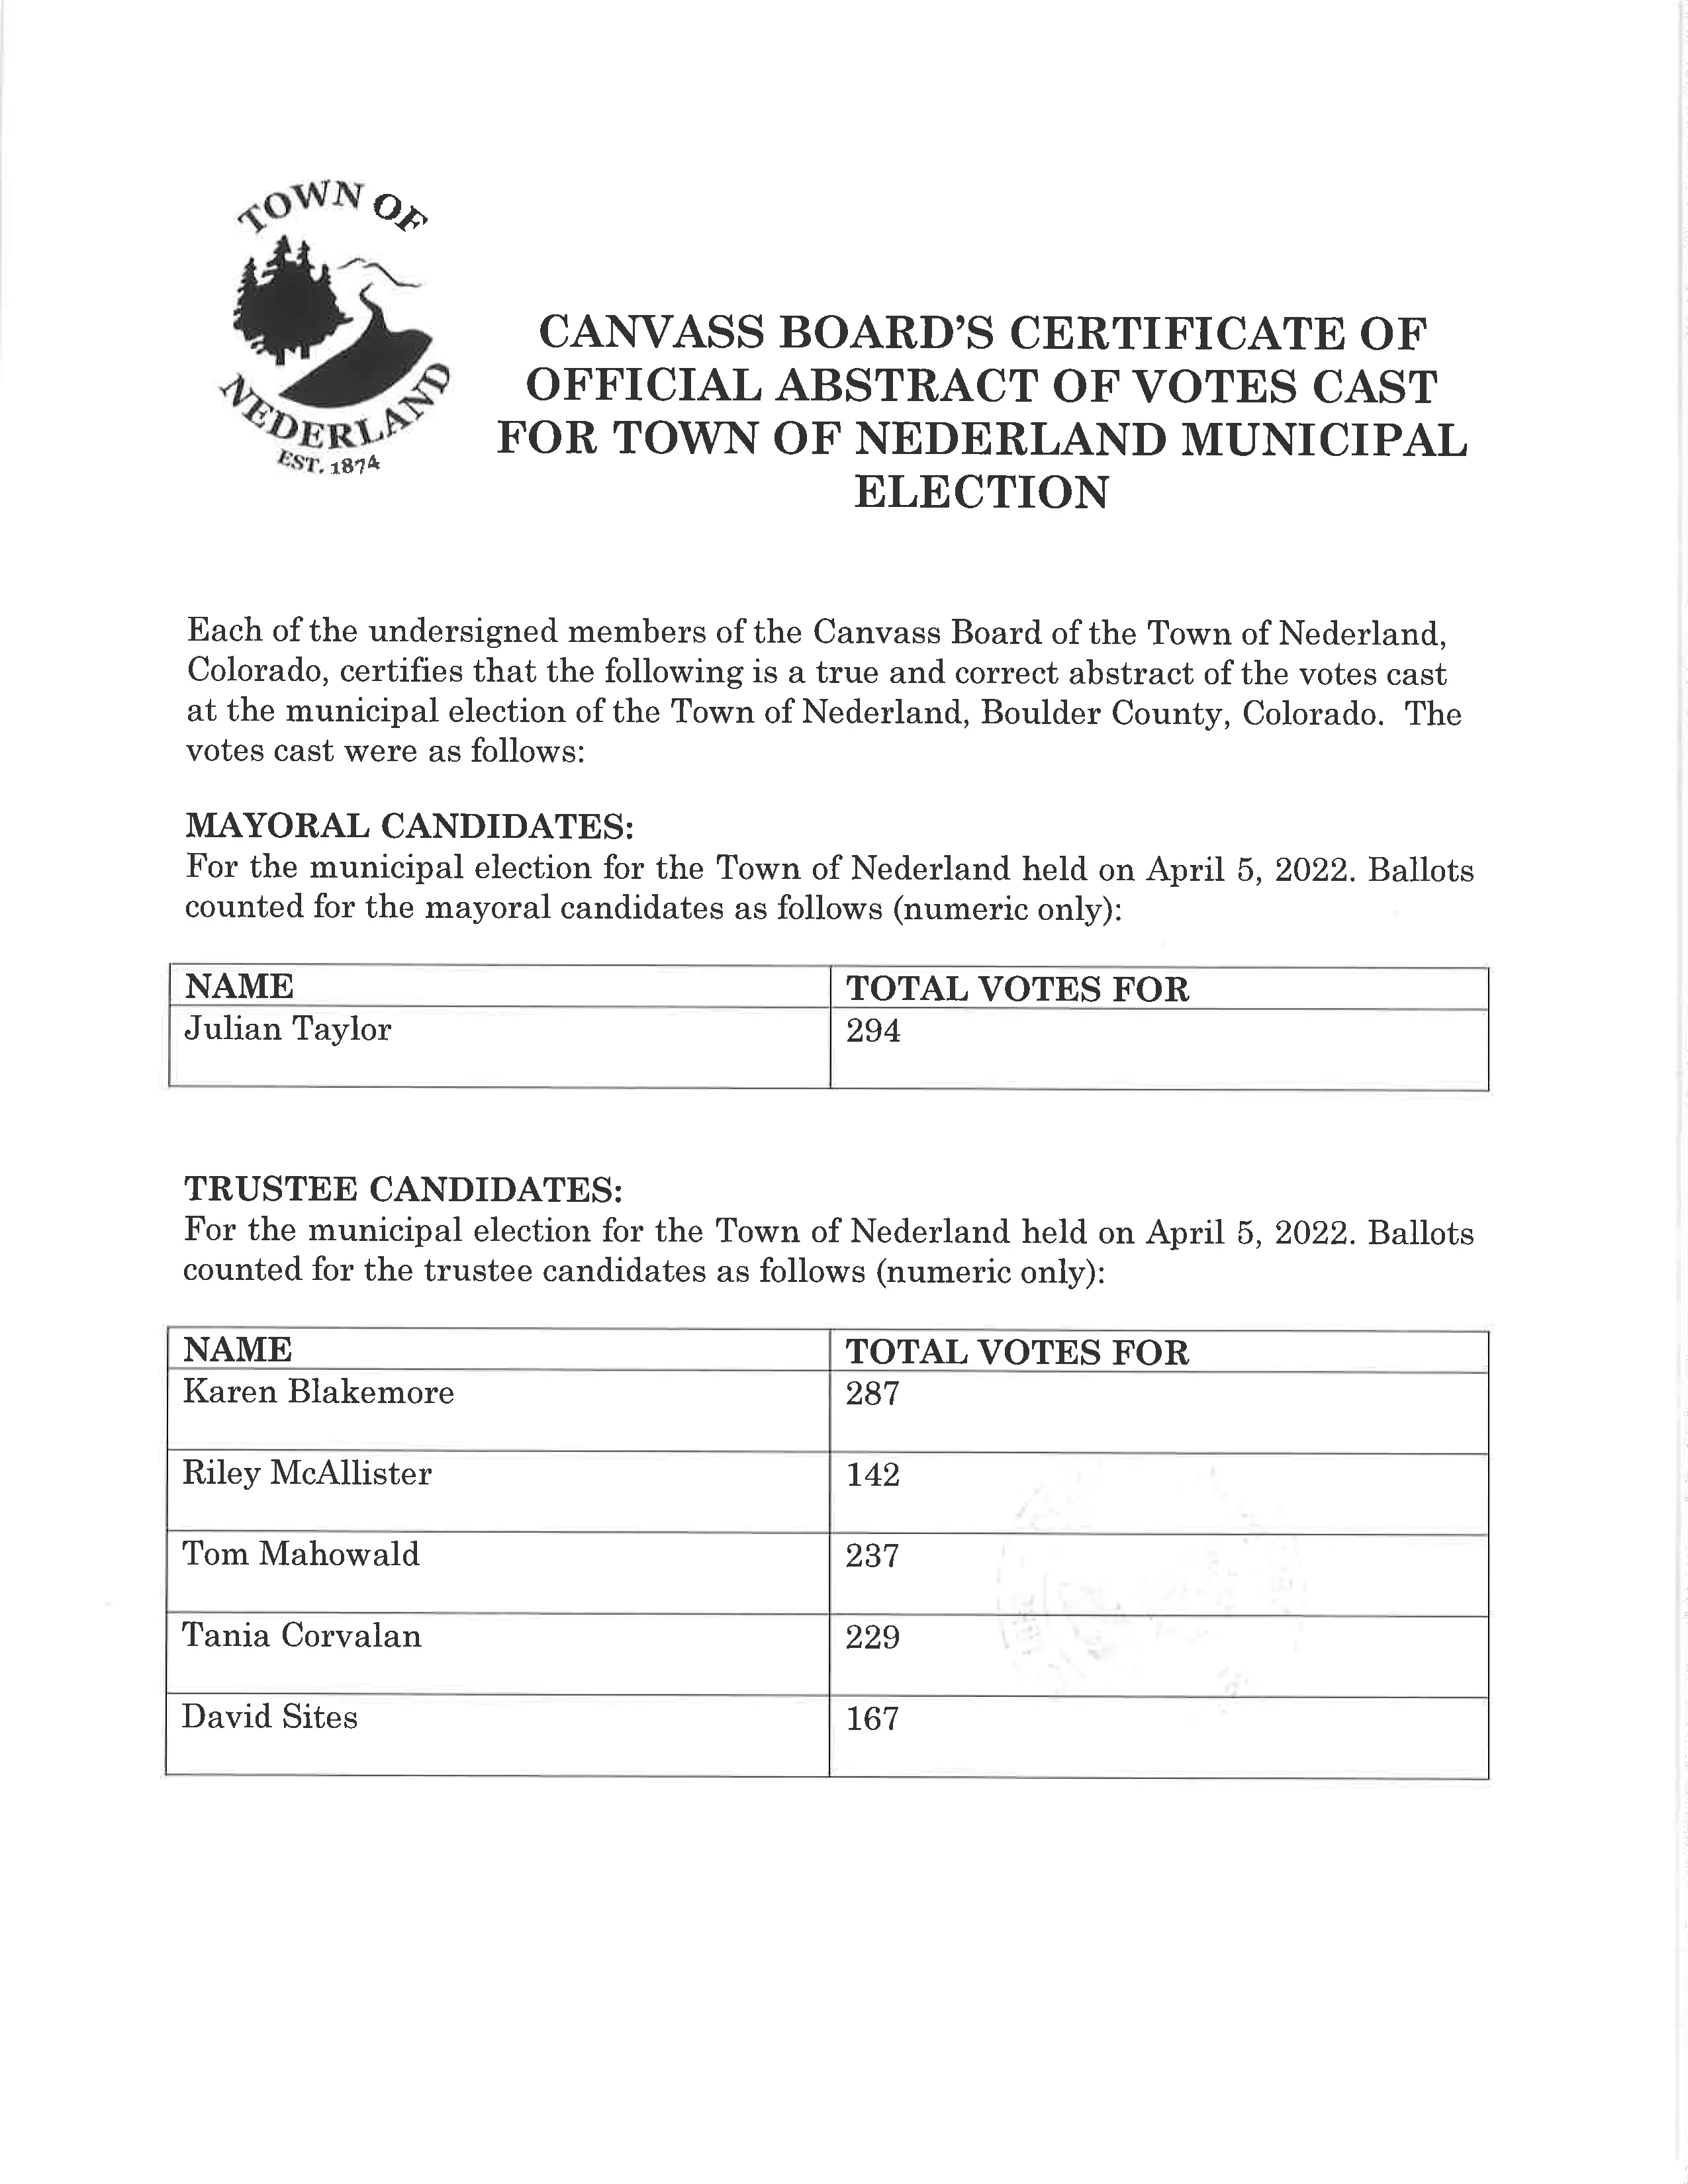 Canvass Board's Certificate of Official Abstract of Votes Cast for Town of Nederland Municipal Election. This list can also be found at https://townofnederland.colorado.gov/2022election